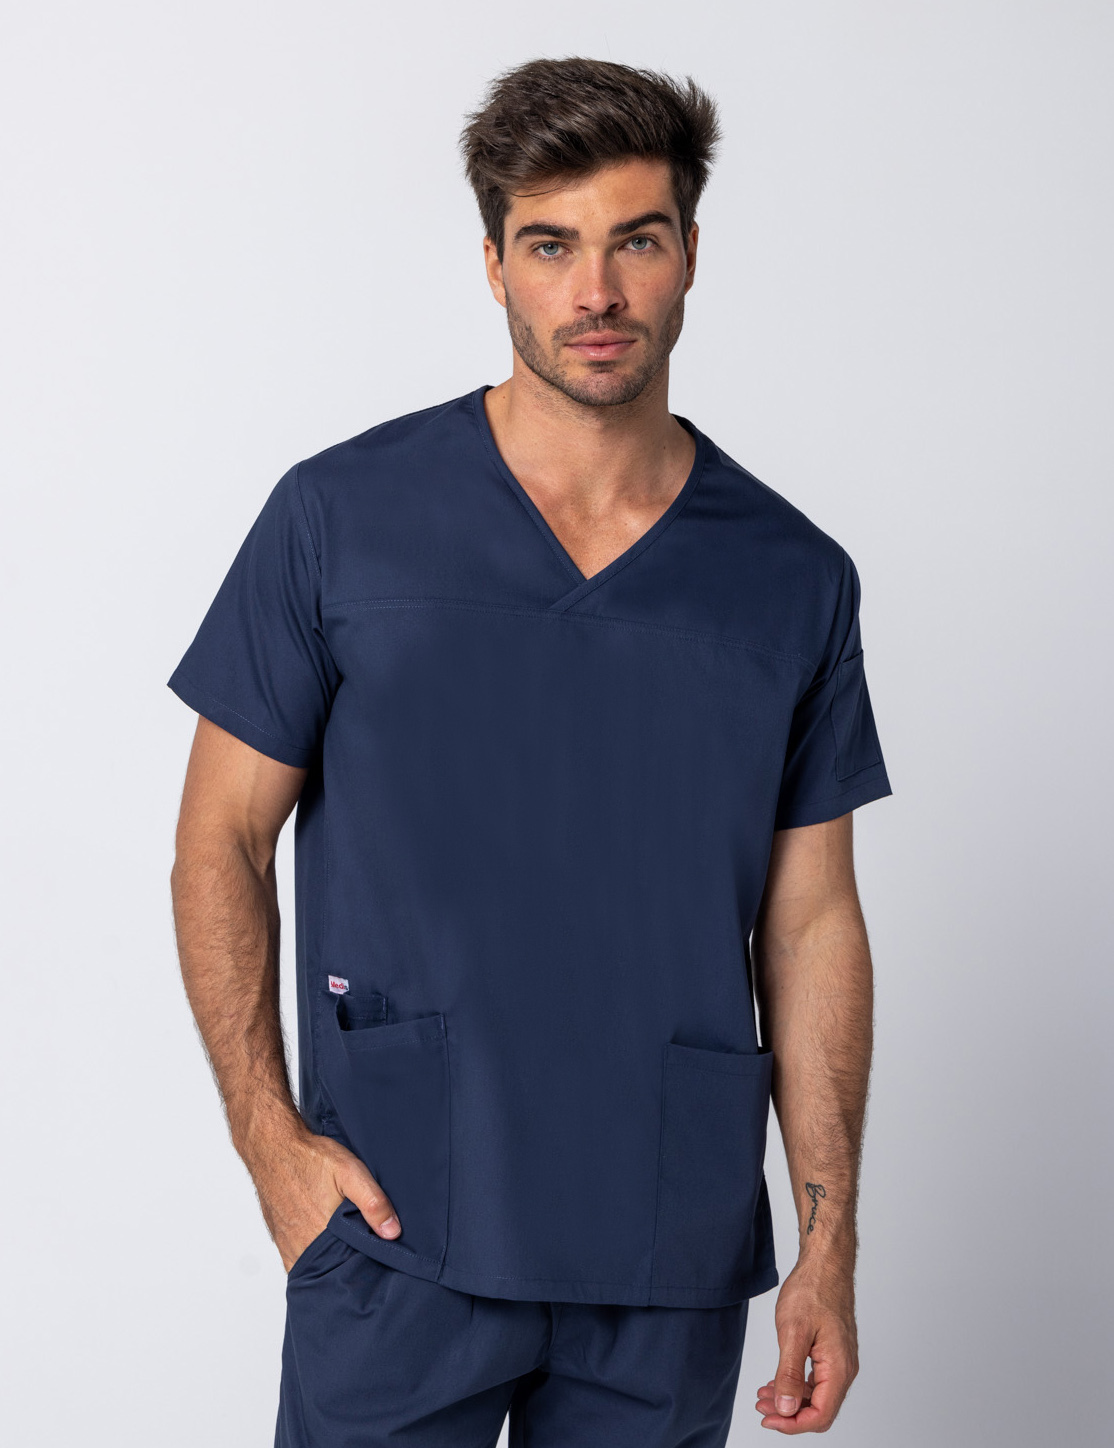 Men's Fit Solid Scrub Top - Navy - 2X Large